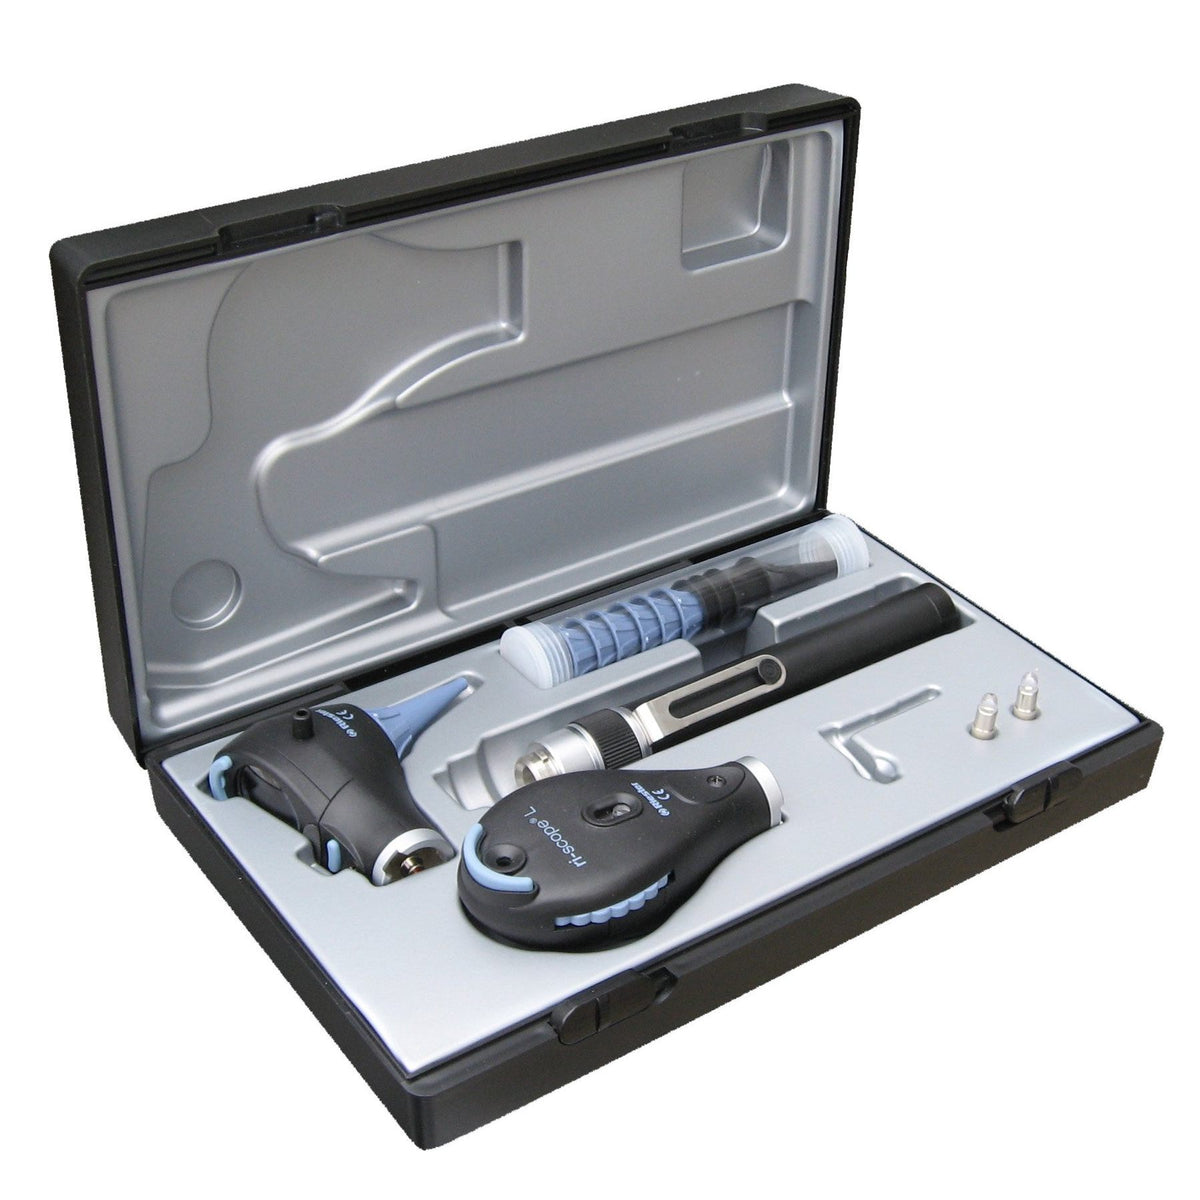 Riester Ri-Scope L Otoscope / Ophthalmoscope L2/L1 LED/XL 3.5 V AA Handle for 2 Lithium Batteries